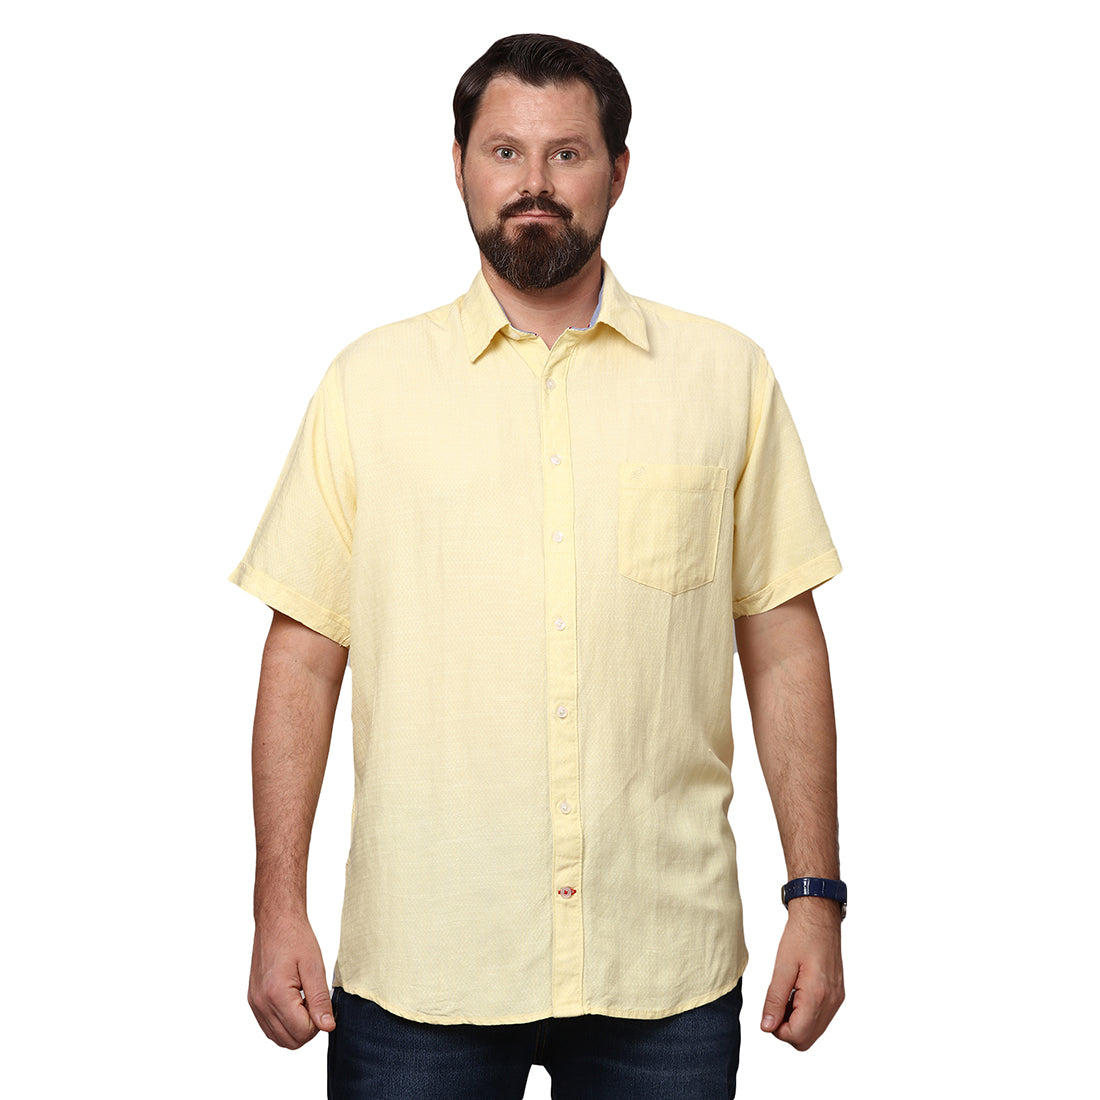 Big & Bold Solid Yellow Half Sleeves Slim Fit Casual Shirts (Plus Size) - Double Two